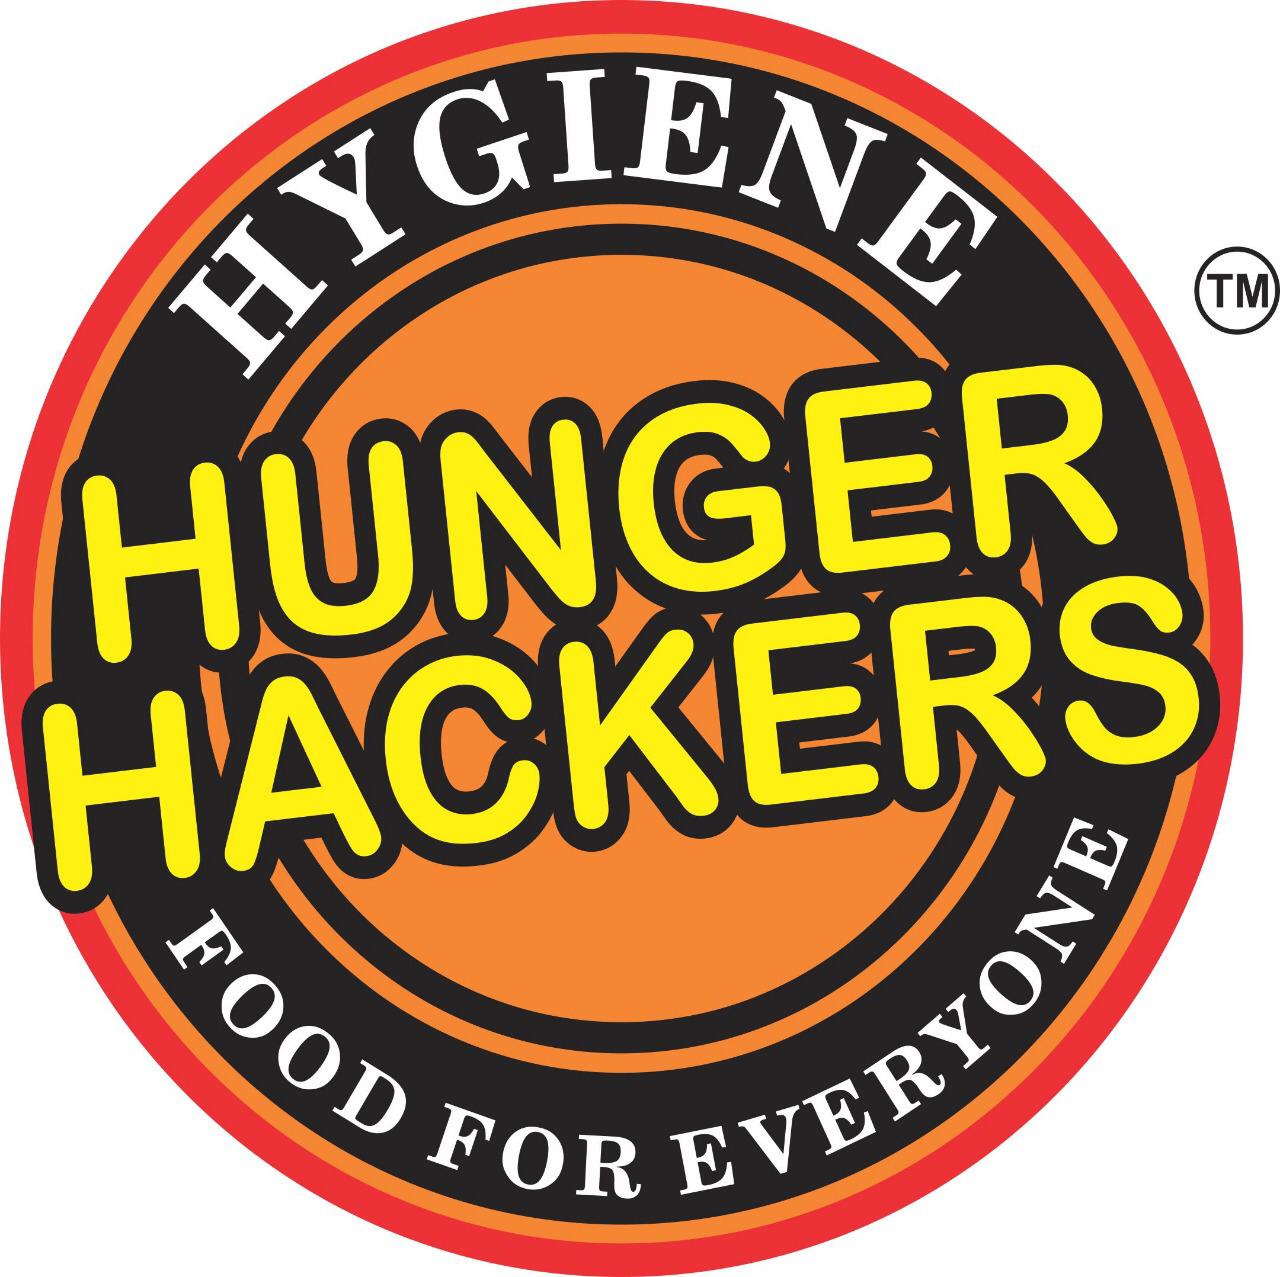 Hunger Hackers